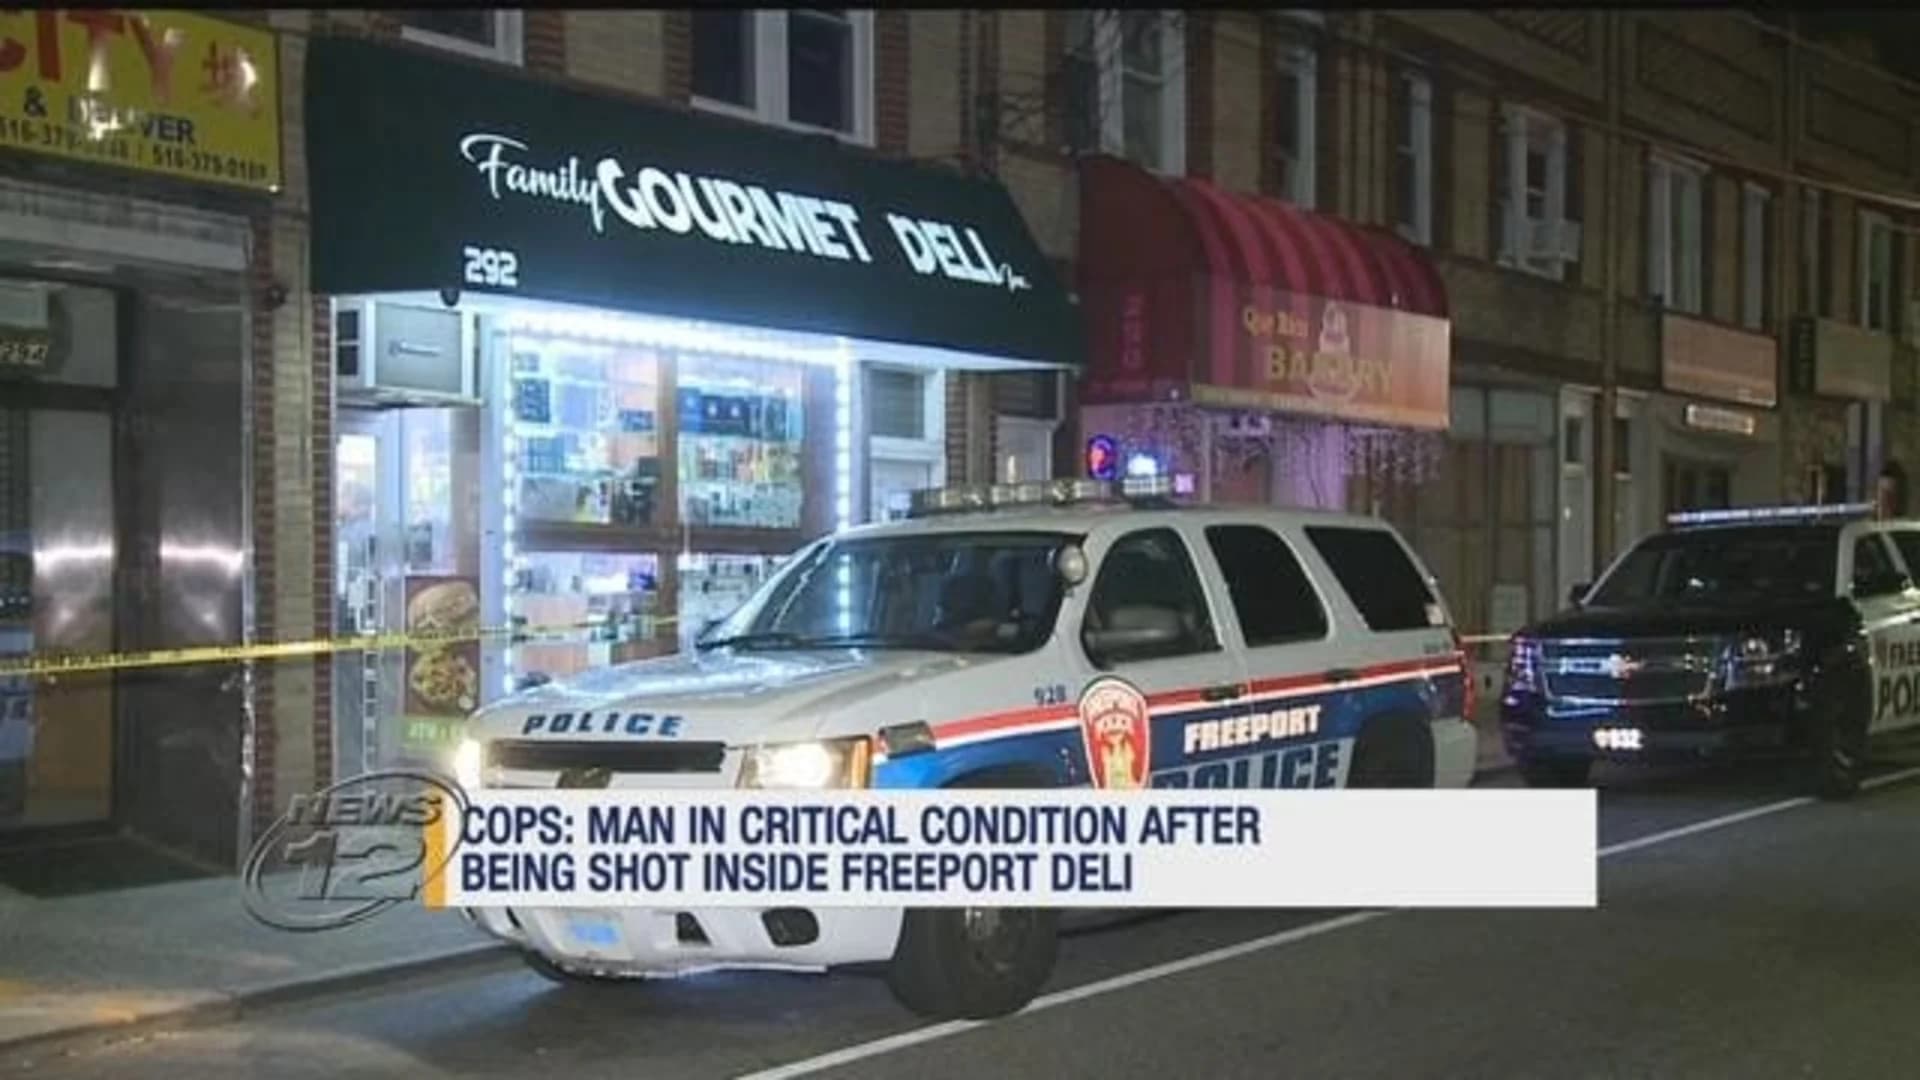 Police: Cashier shot during robbery at Freeport deli